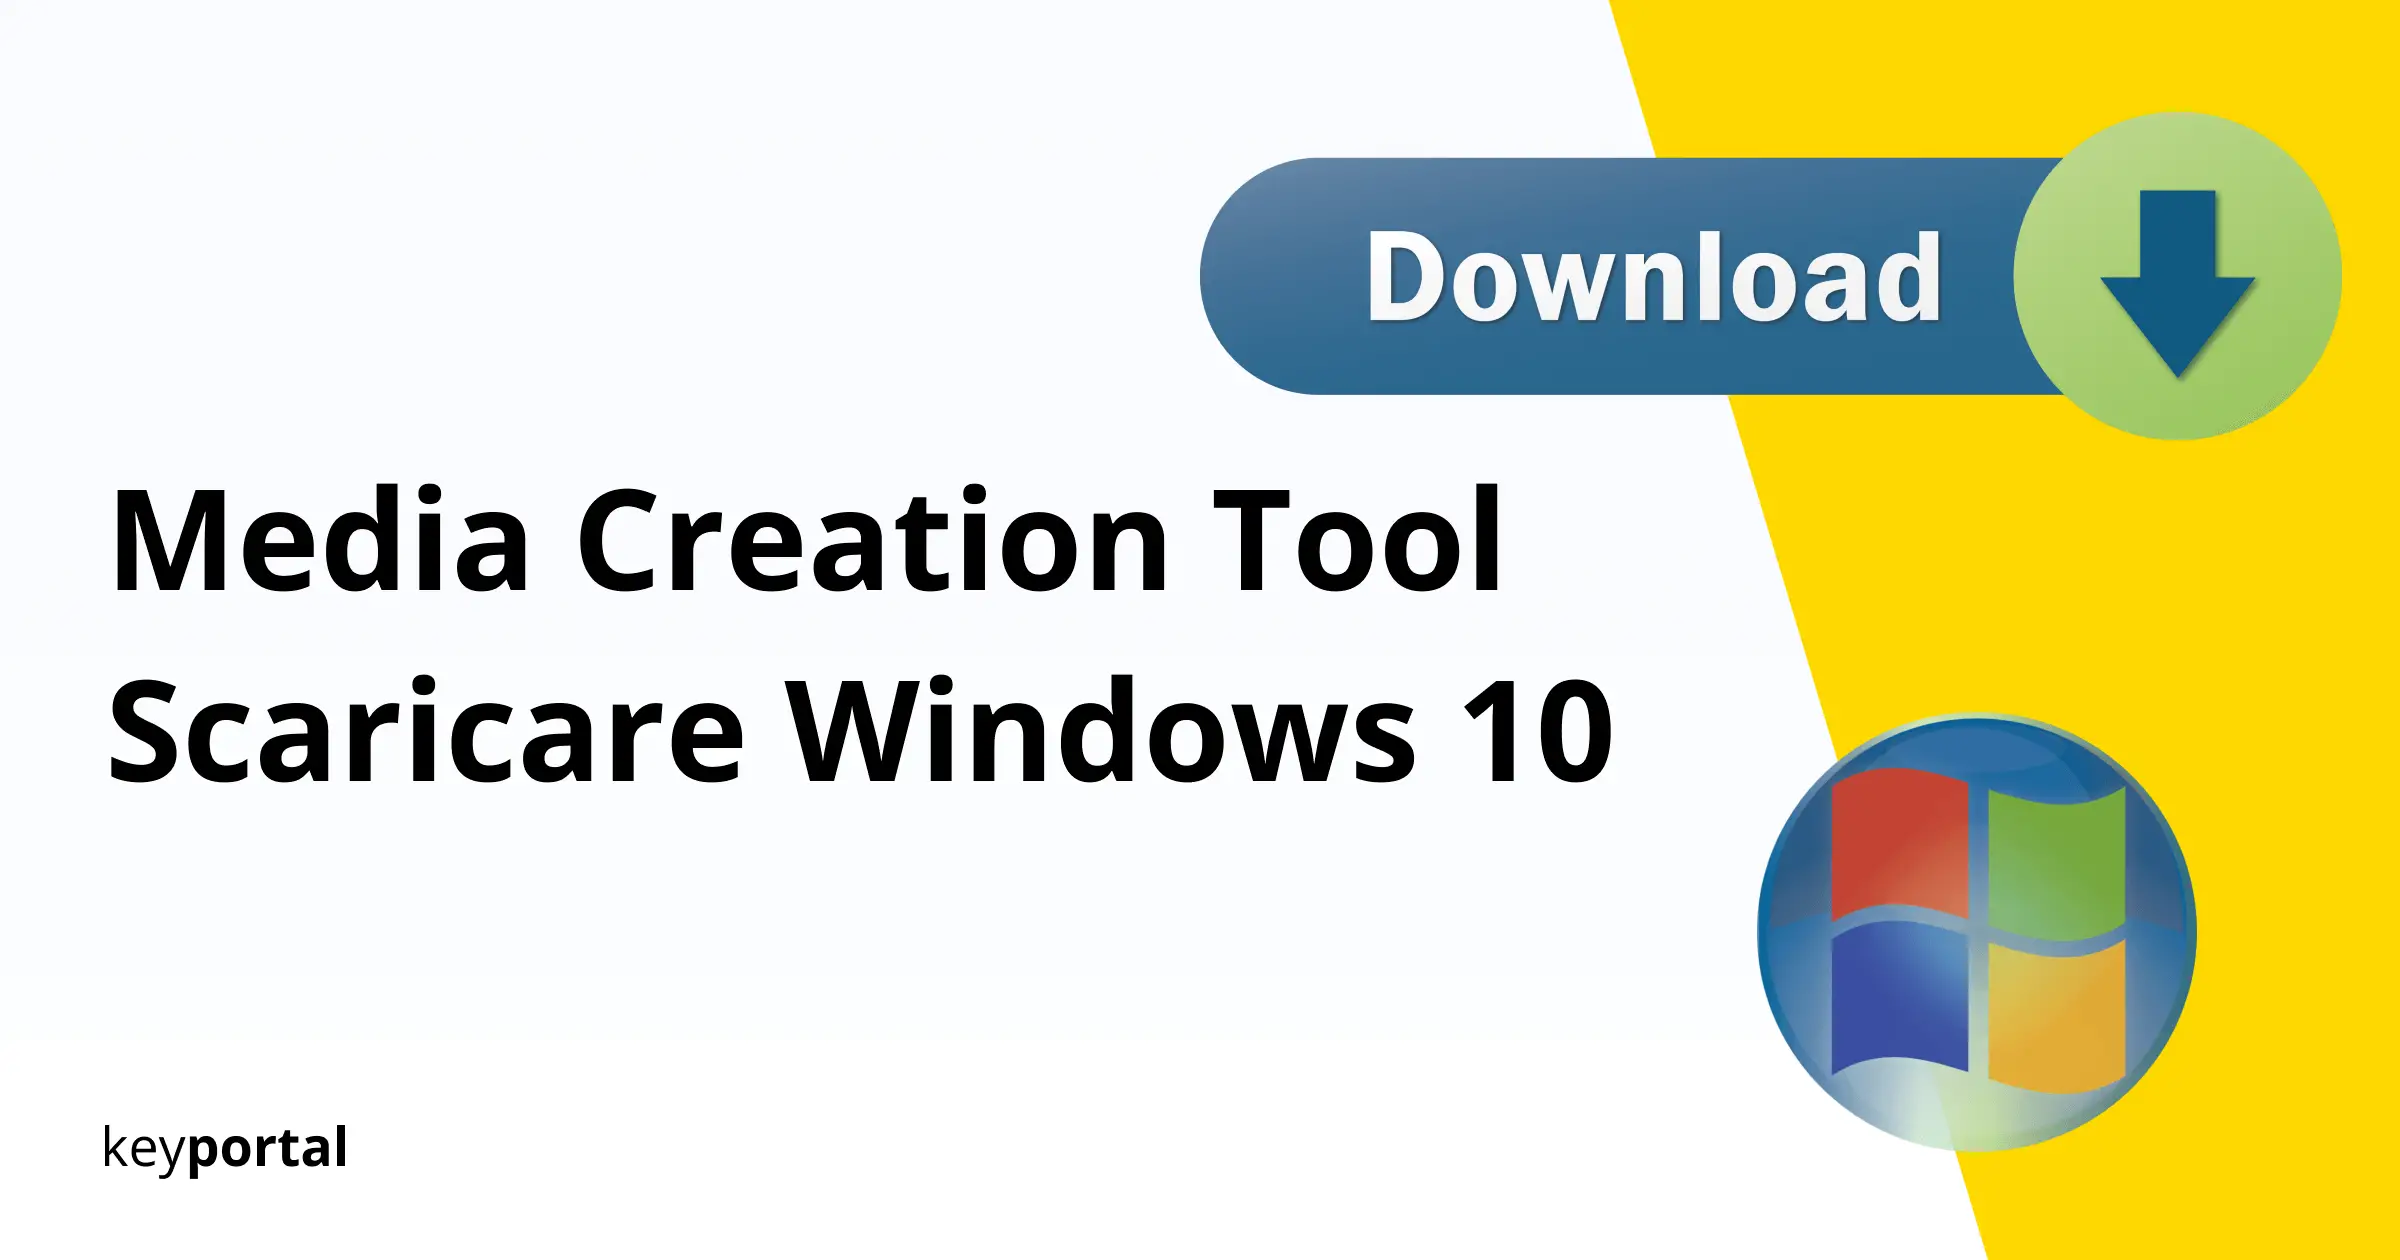 media creation tool to download windows 10